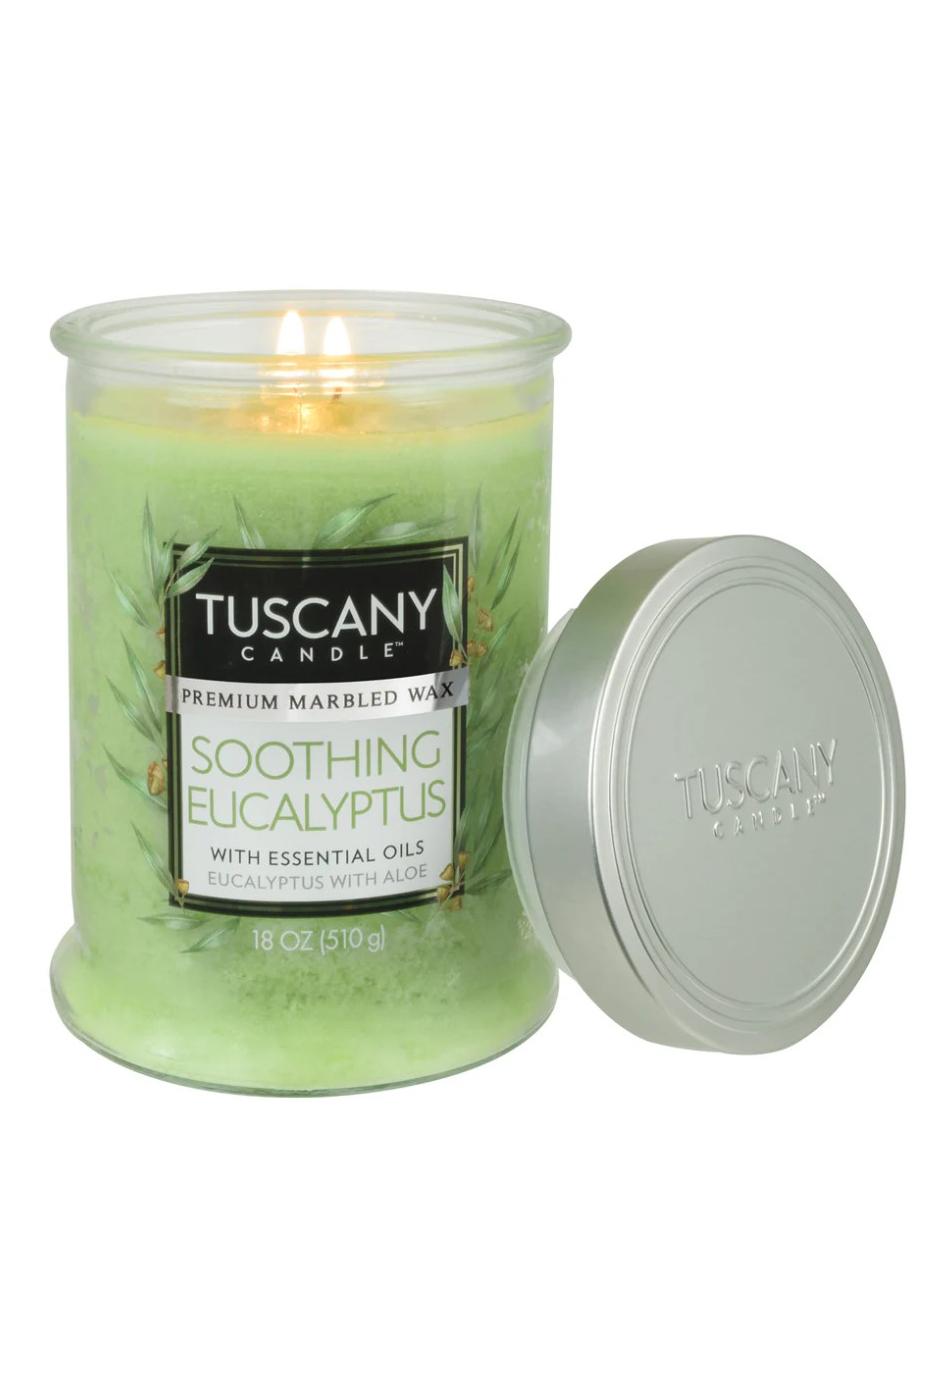 Tuscany Candle Soothing Eucalyptus Scented Candle; image 2 of 2